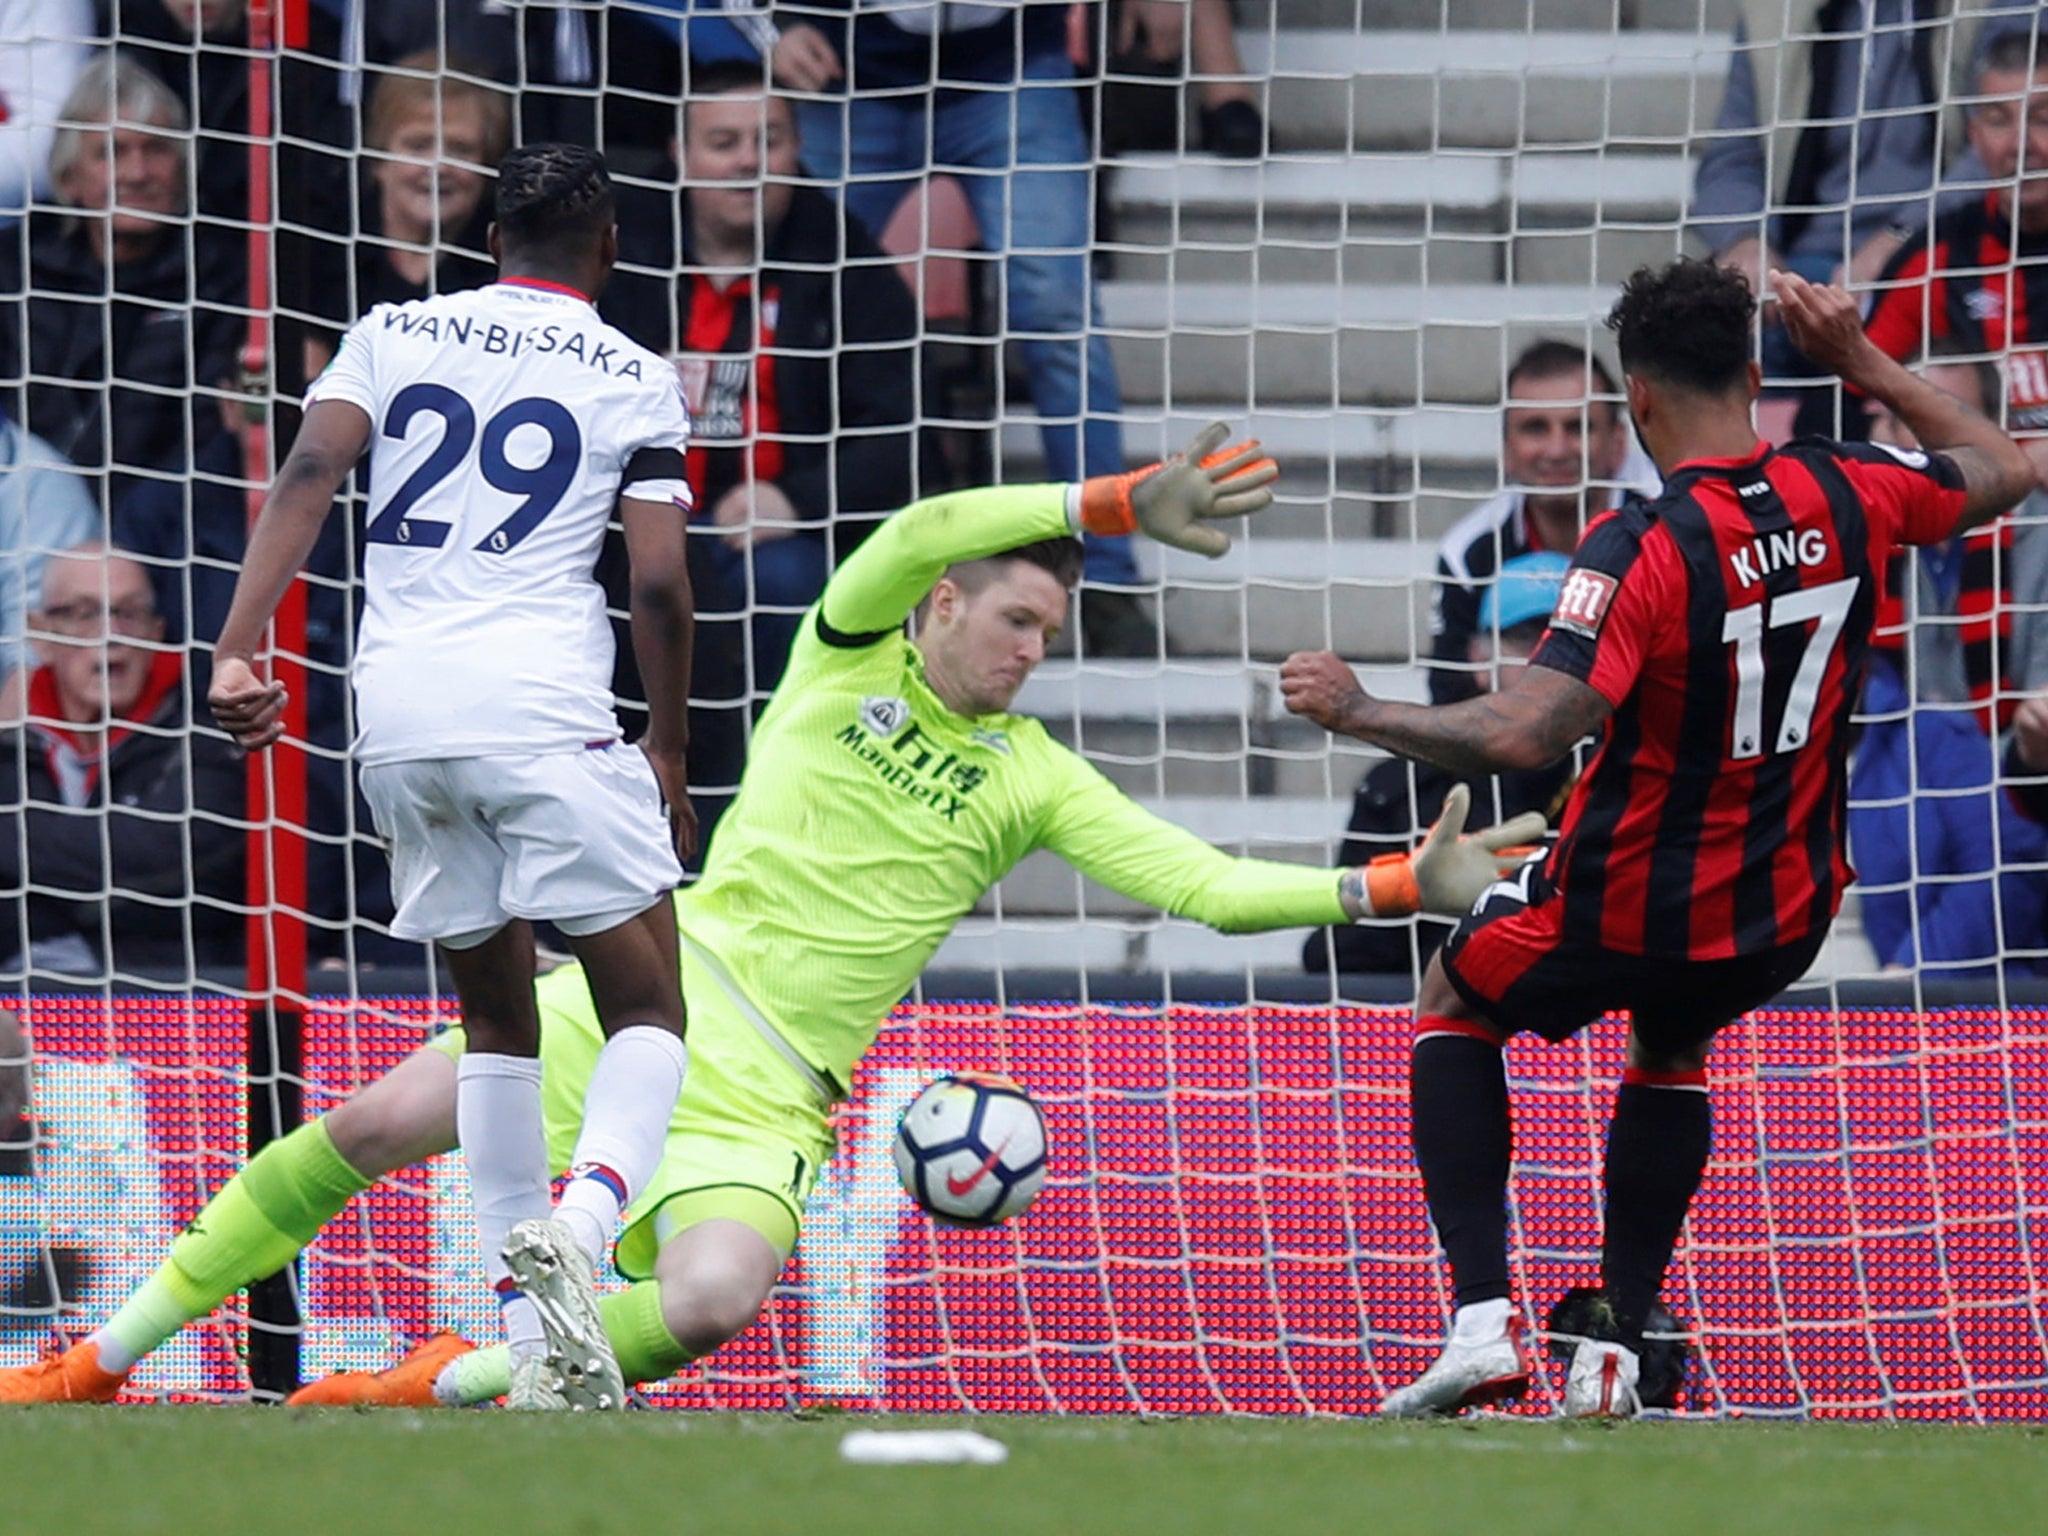 Josh King tucks the ball away to give Bournemouth a 2-2 draw with Crystal Palace